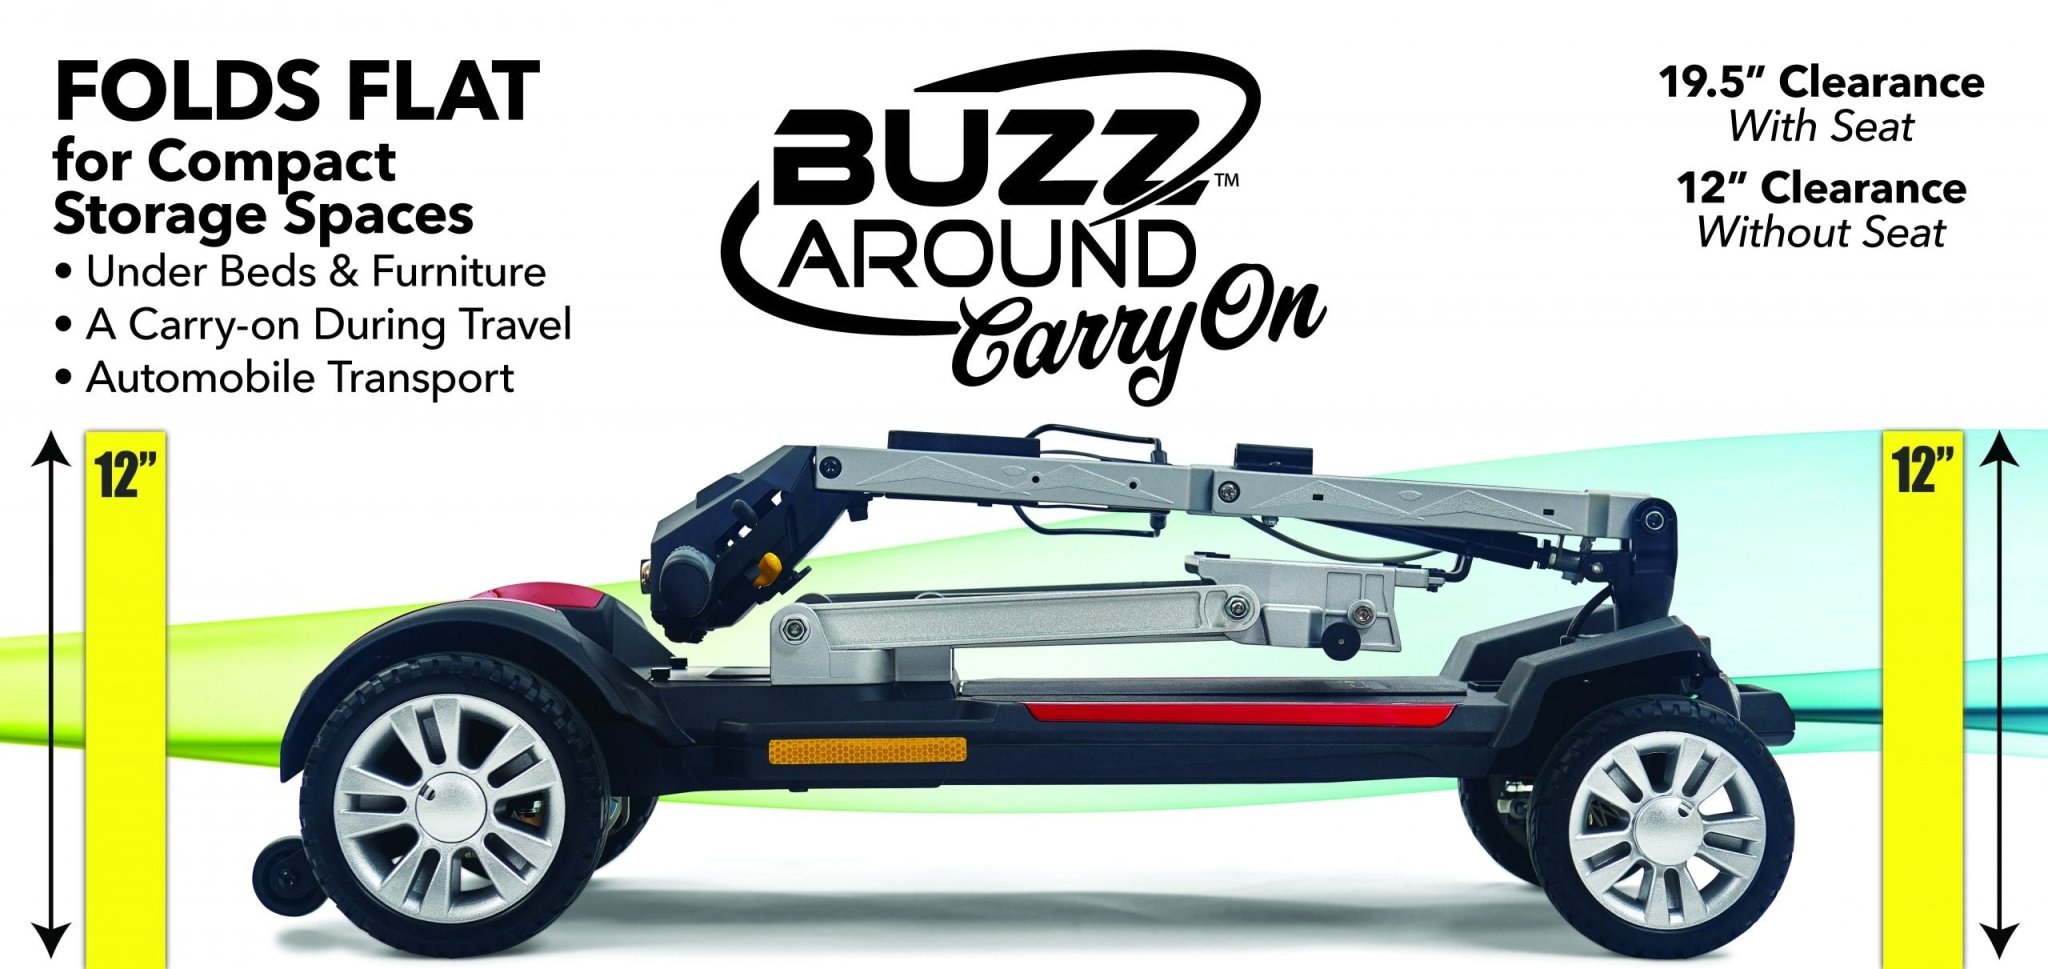 Buzzaround Carry On Folding Scooter Model GB120 by Golden Technologies - Midwest DME Supply